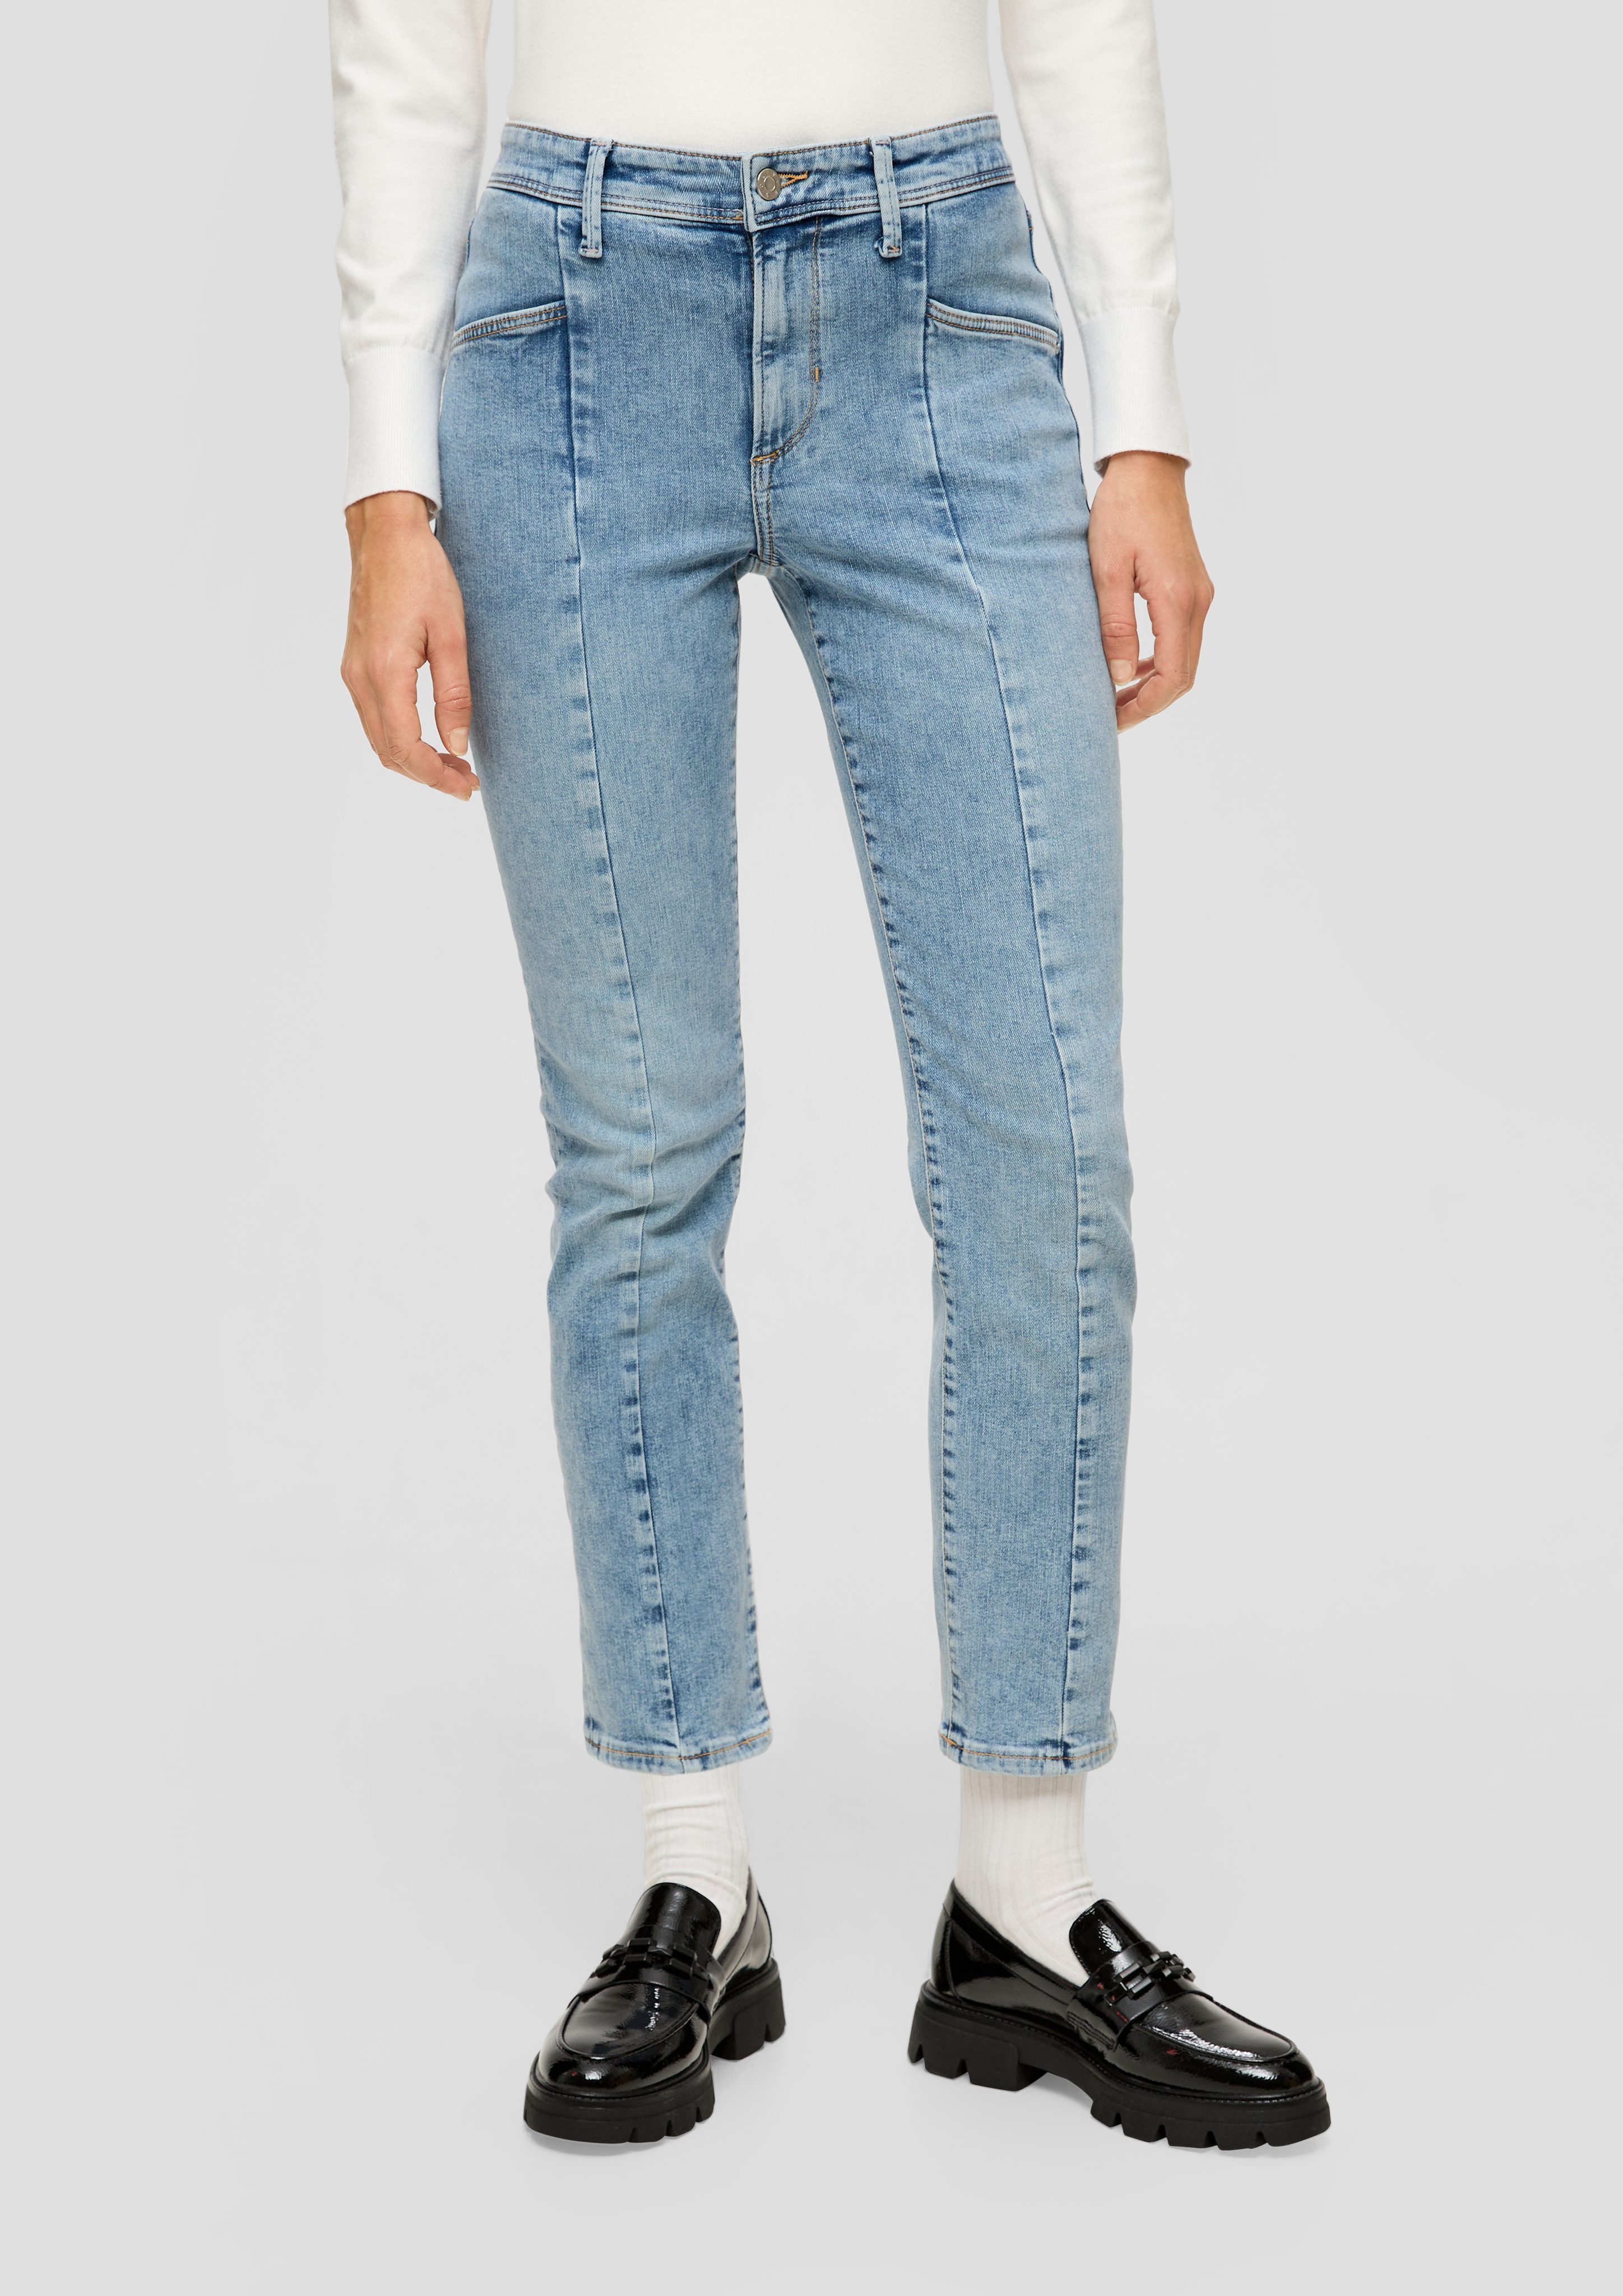 Leg / Ankle Waschung, / Slim Fit / Slim Rise 7/8-Jeans Mid Teilungsnähte Label-Patch, s.Oliver Jeans